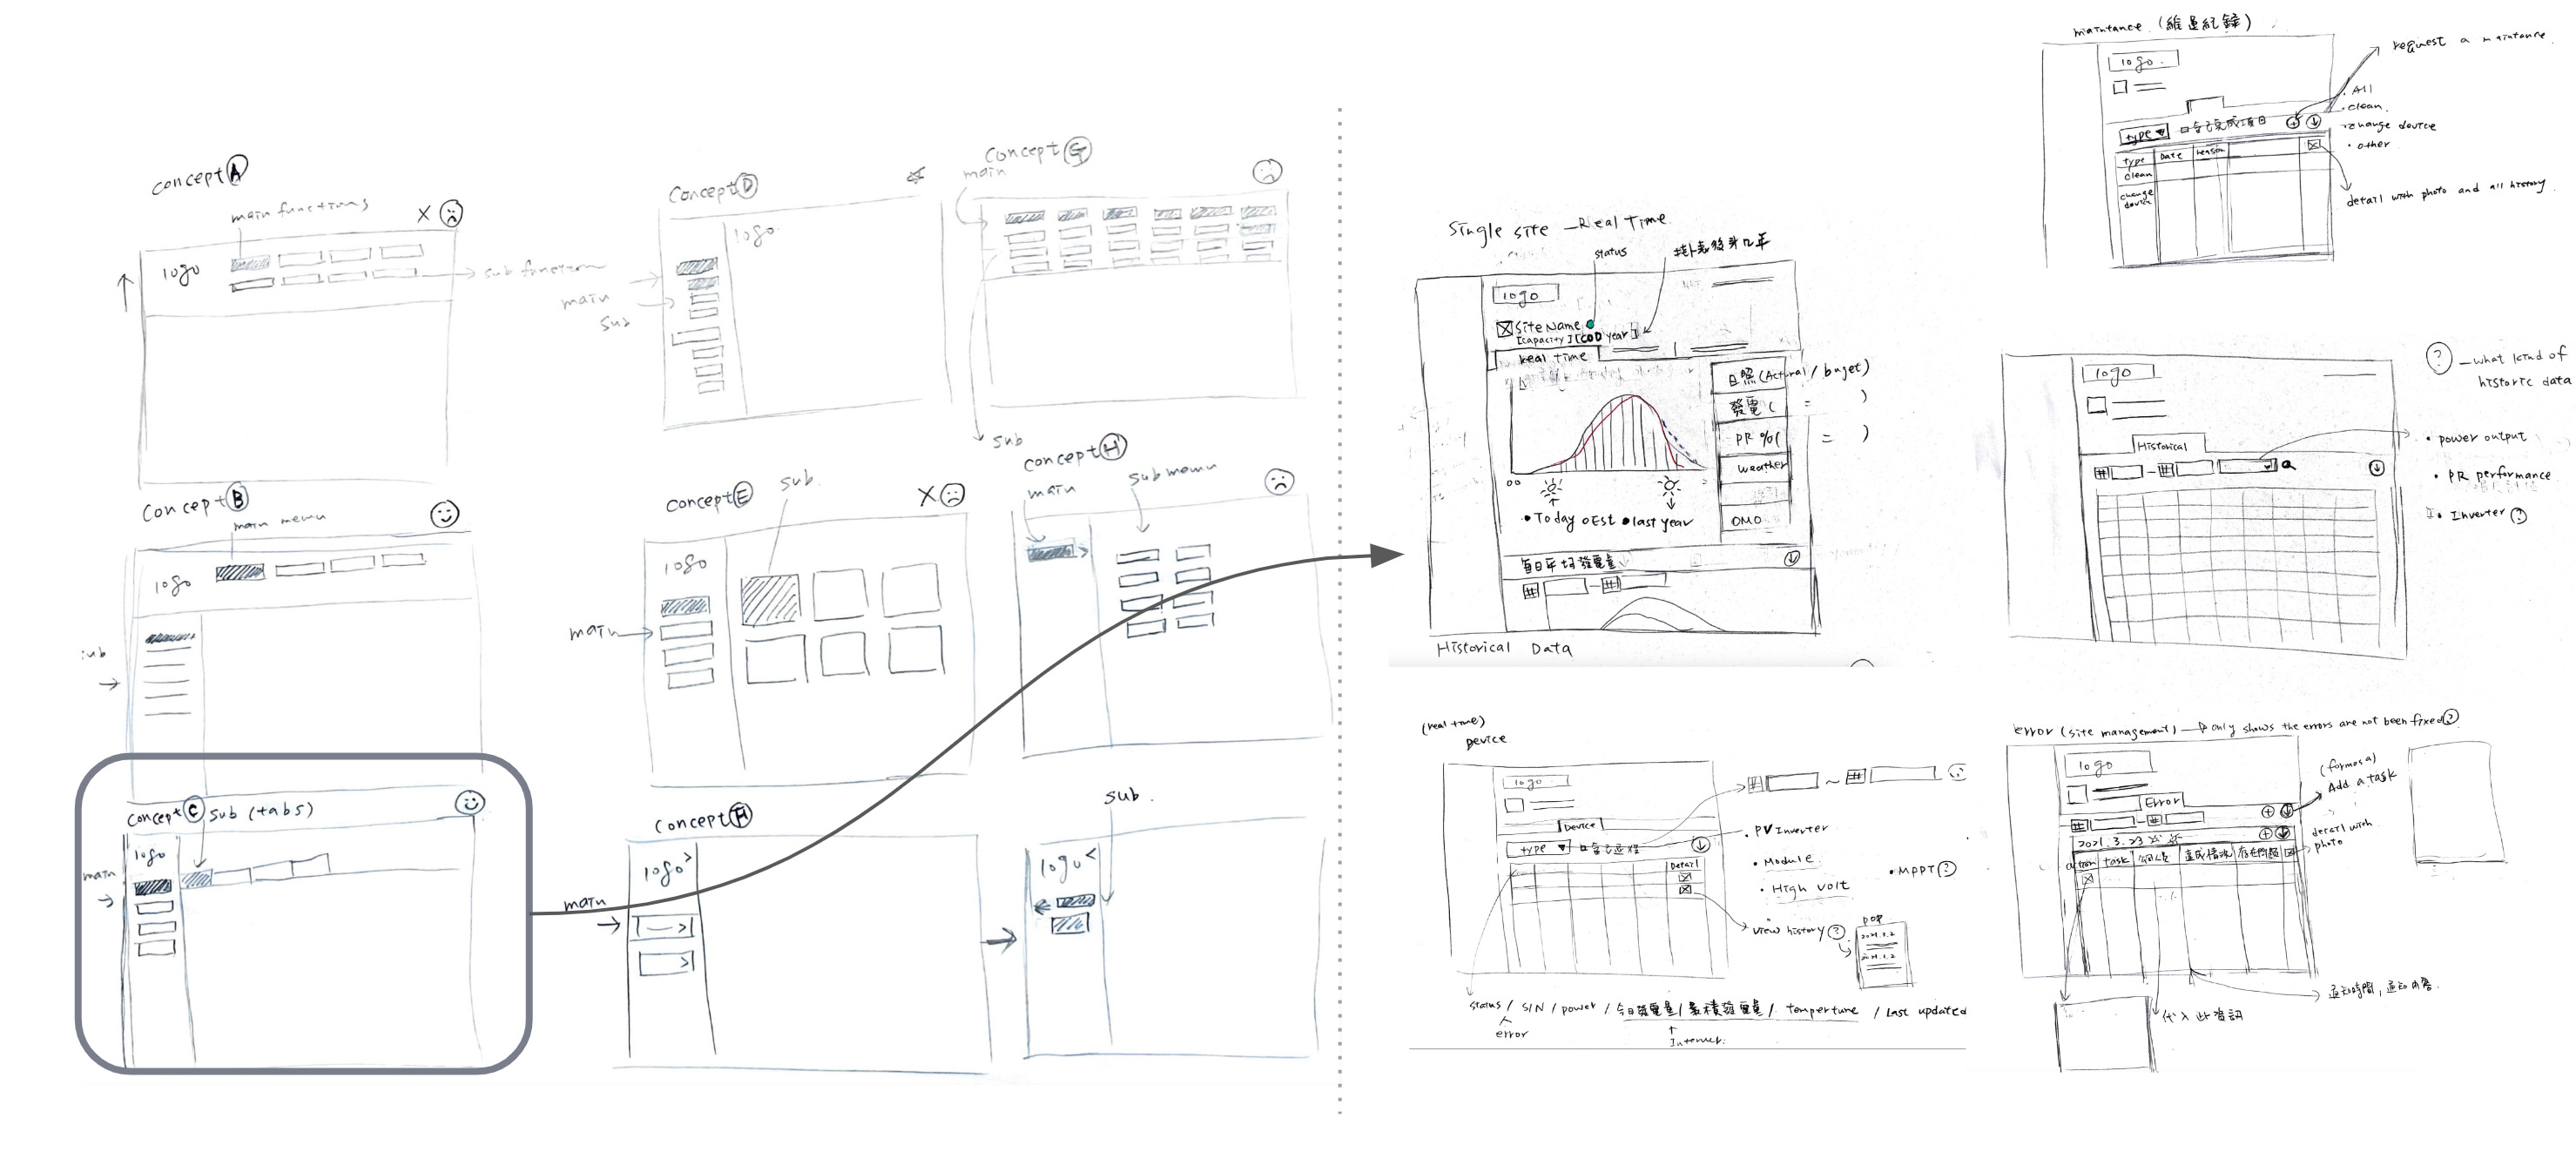 Example of Paper wireframe